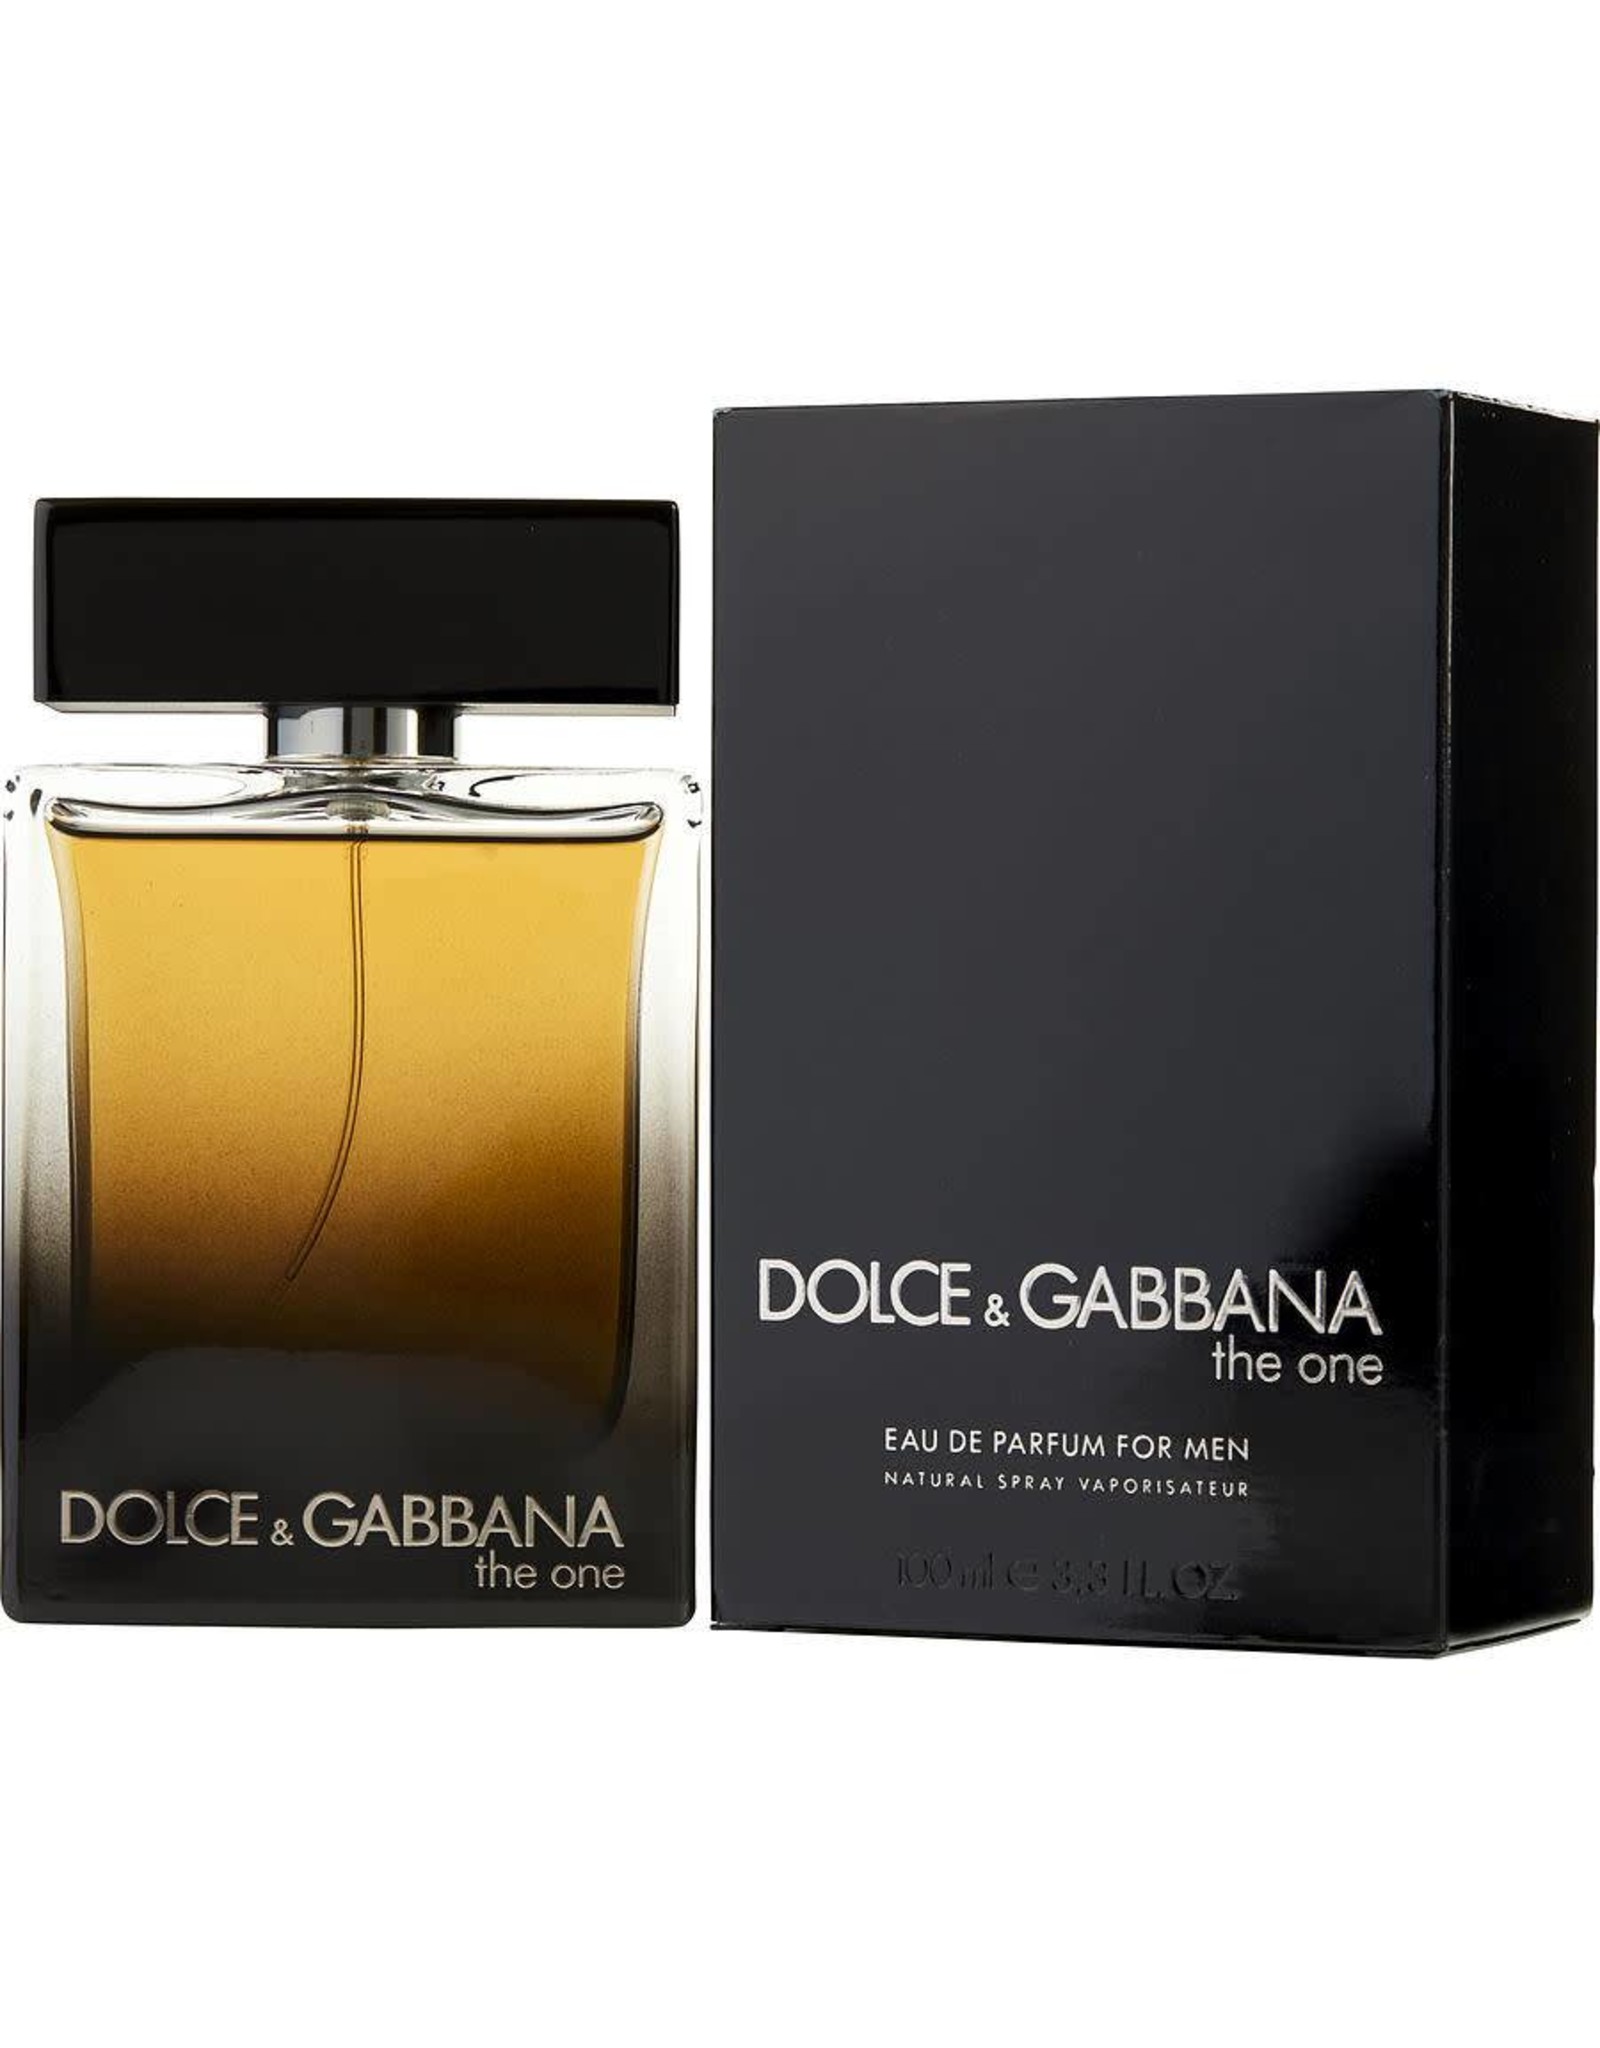 DOLCE & GABBANA DOLCE & GABBANA THE ONE POUR HOMME